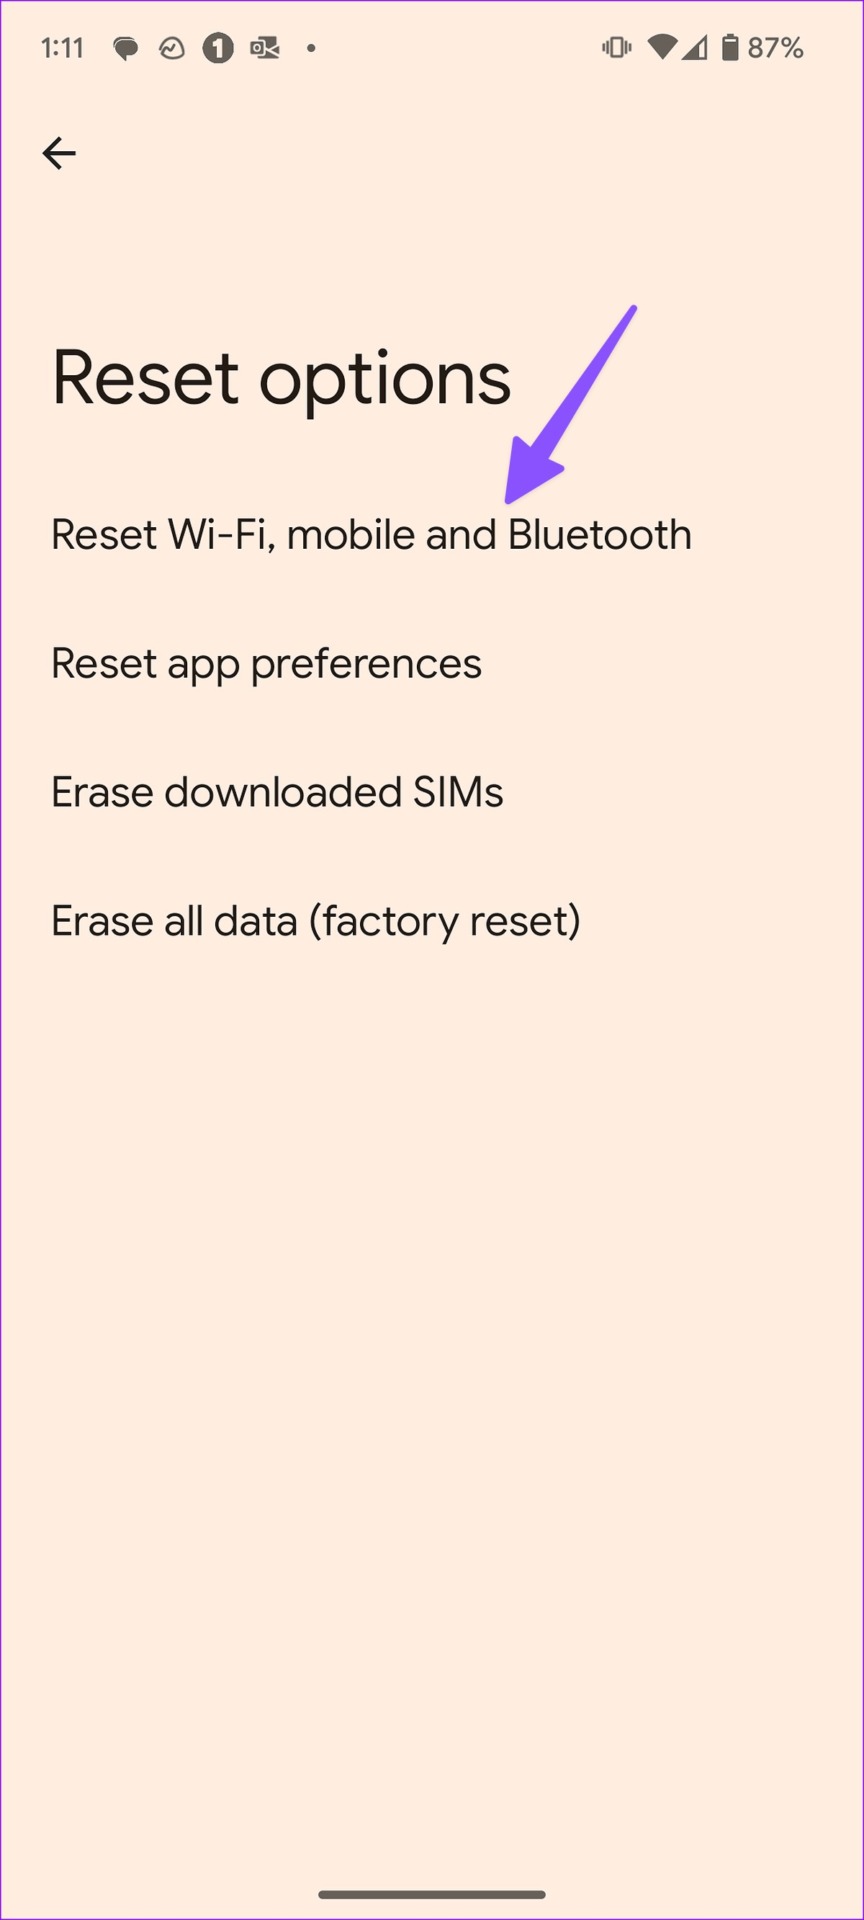 reset network settings on Android